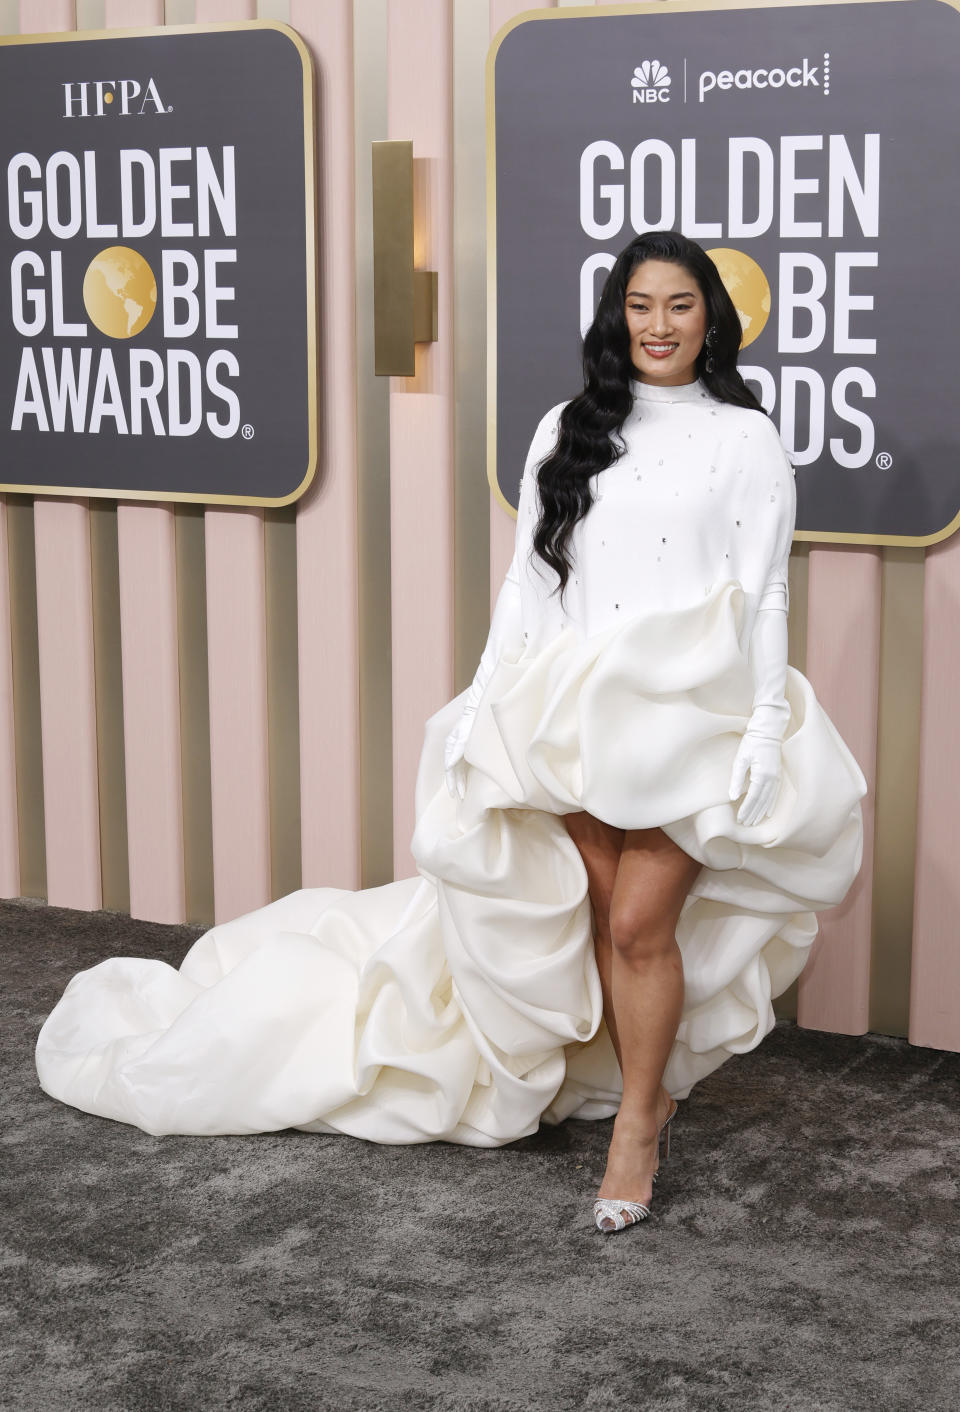 BEVERLY HILLS, CALIFORNIA - JANUARY 10: Chloe Flower attends the 80th Annual Golden Globe Awards at The Beverly Hilton on January 10, 2023 in Beverly Hills, California. (Photo by Frazer Harrison/WireImage)